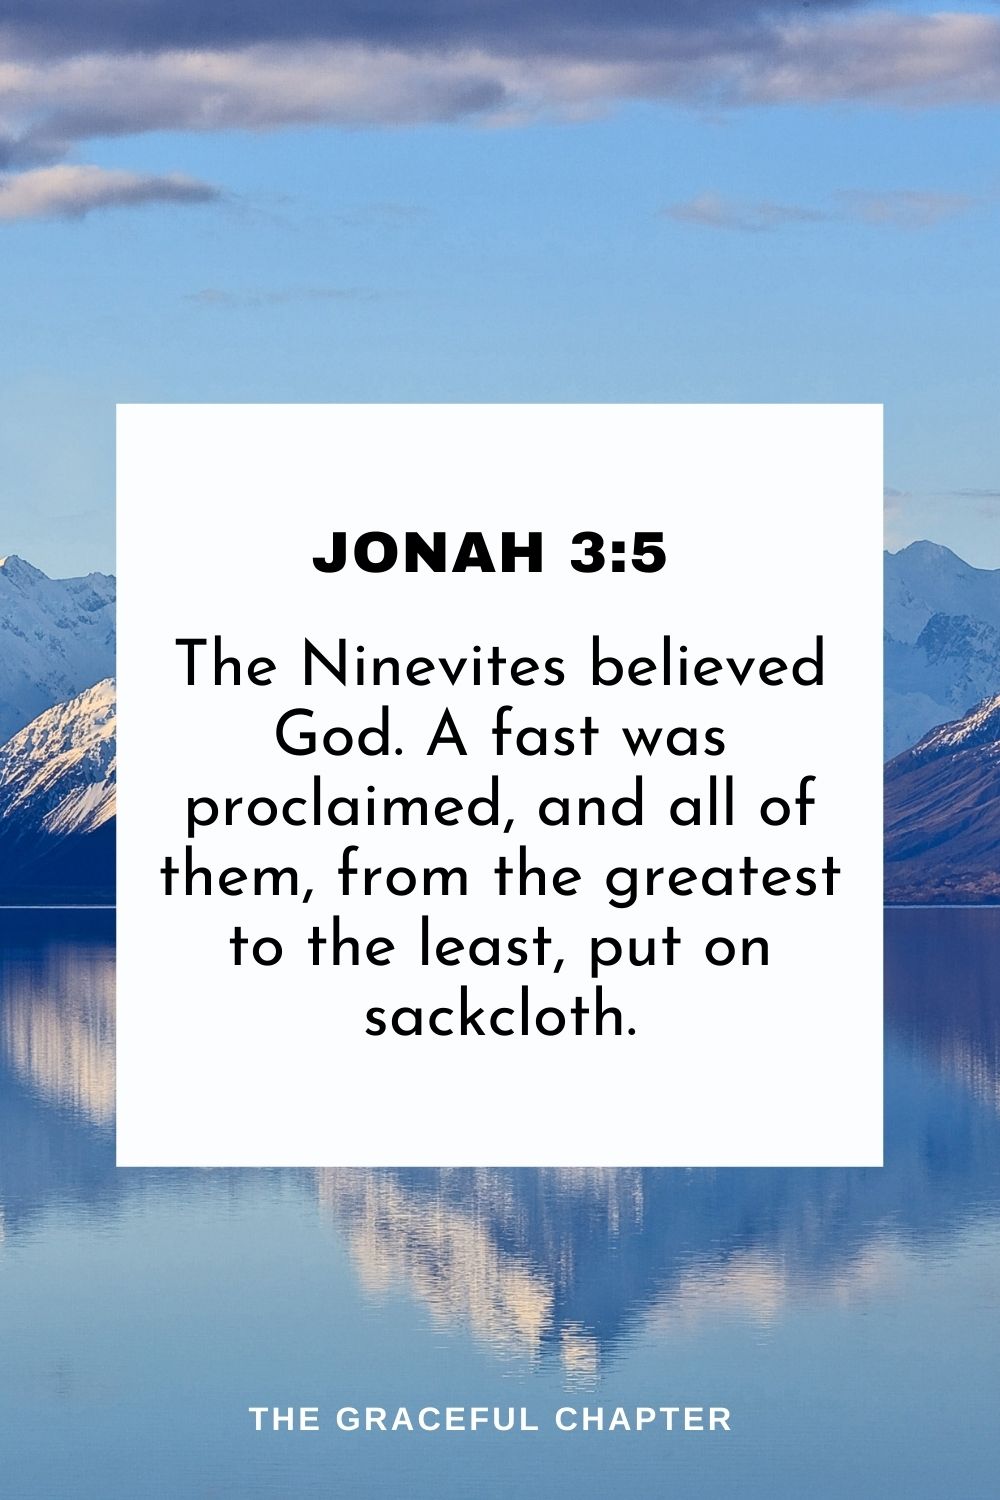 The Ninevites believed God. A fast was proclaimed, and all of them, from the greatest to the least, put on sackcloth. Jonah 3:5